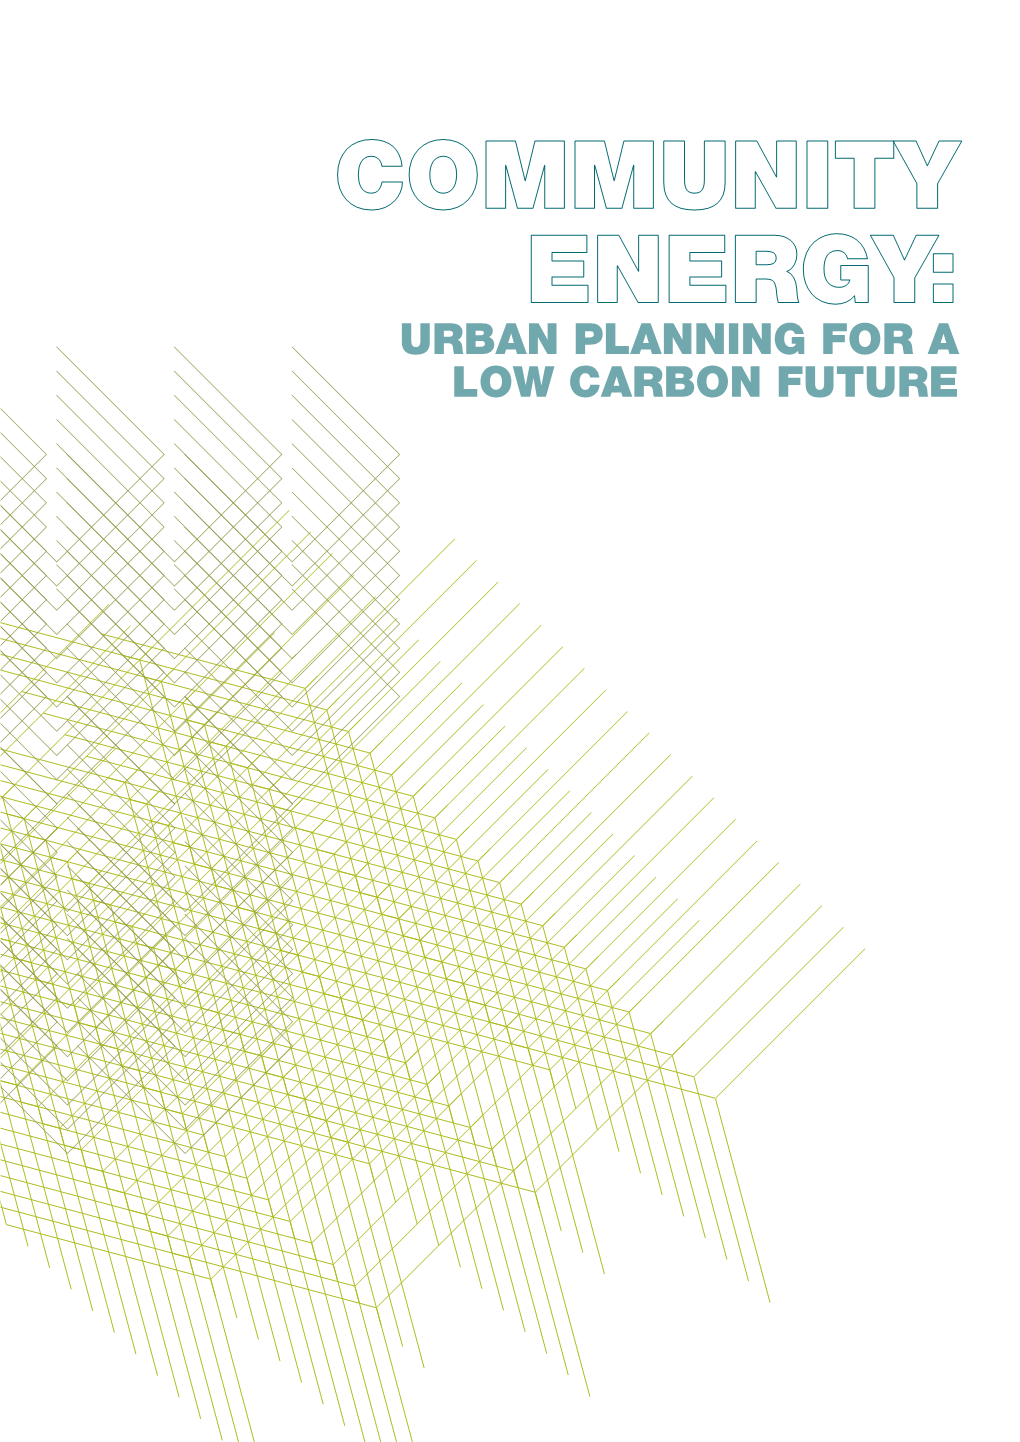 Urban Planning for a Low Carbon Future © TCPA & CHPA 2008